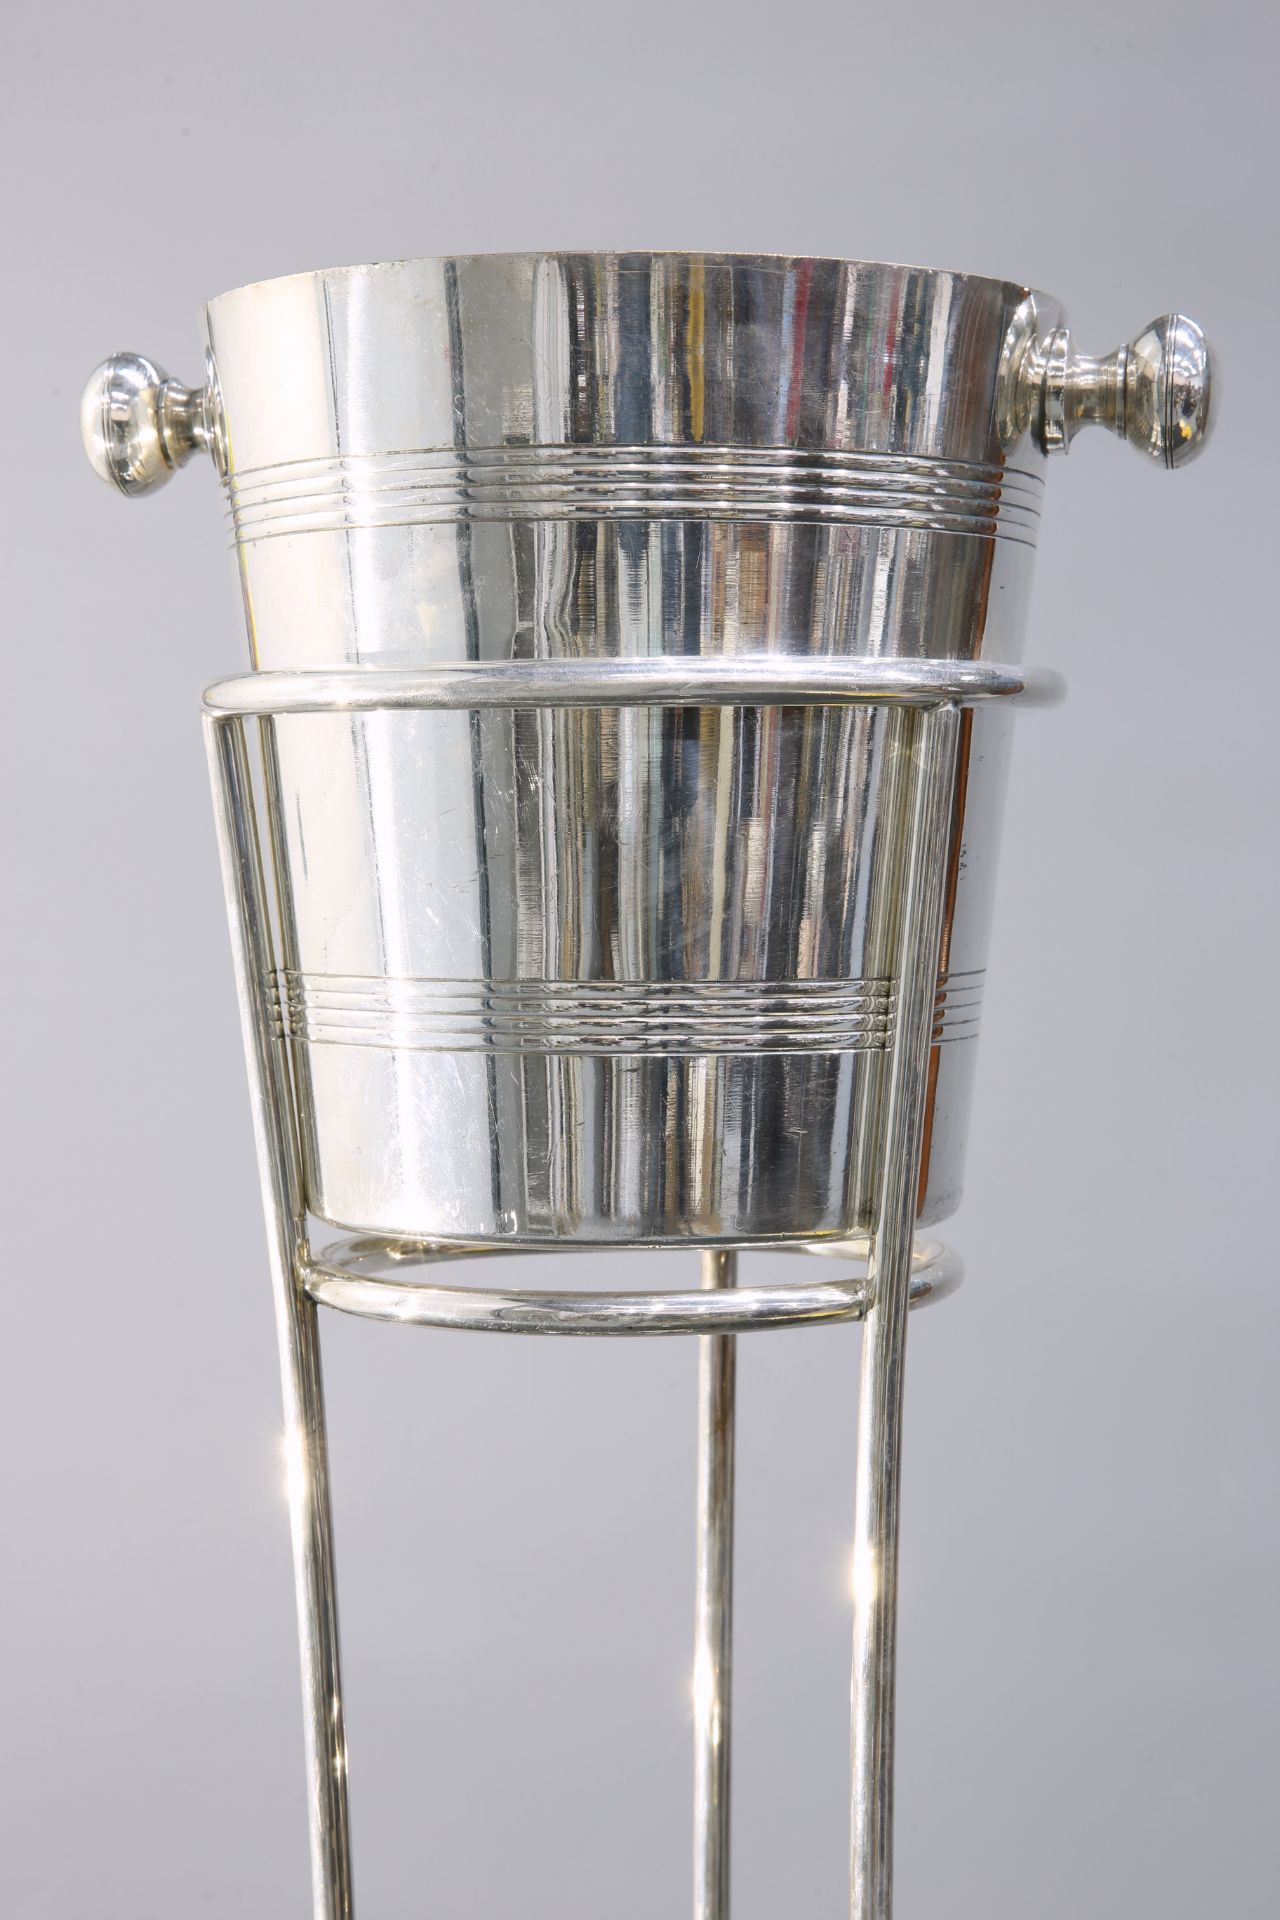 AN ART DECO SILVER-PLATED ICE BUCKET ON STAND - Image 2 of 2